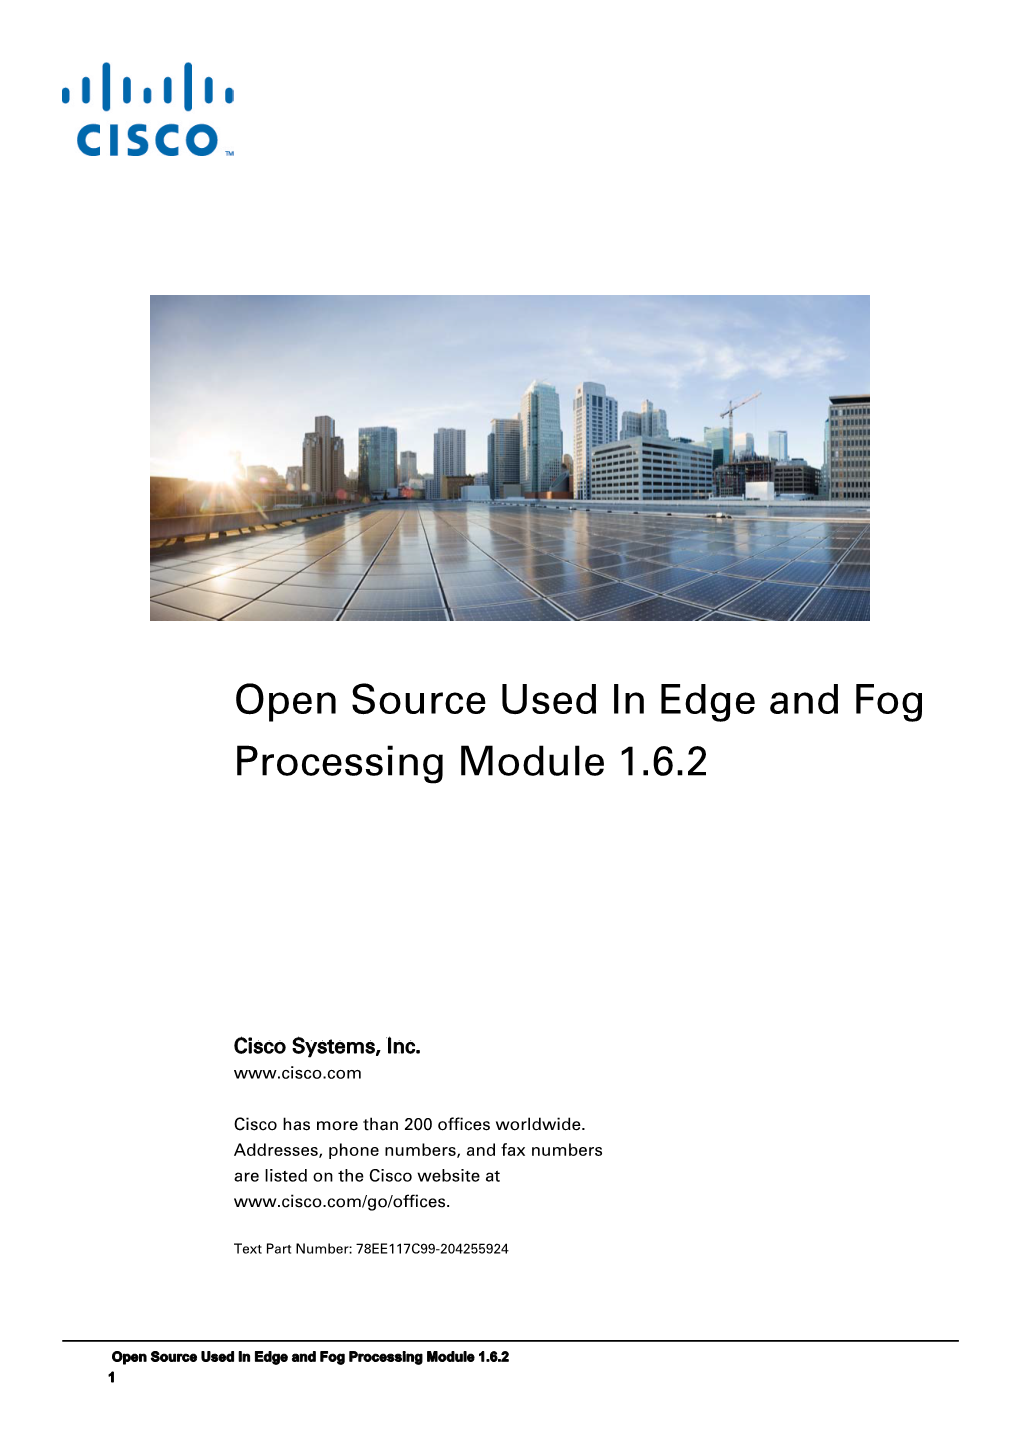 Open Source Used in Edge and Fog Processing Module 1.6.2